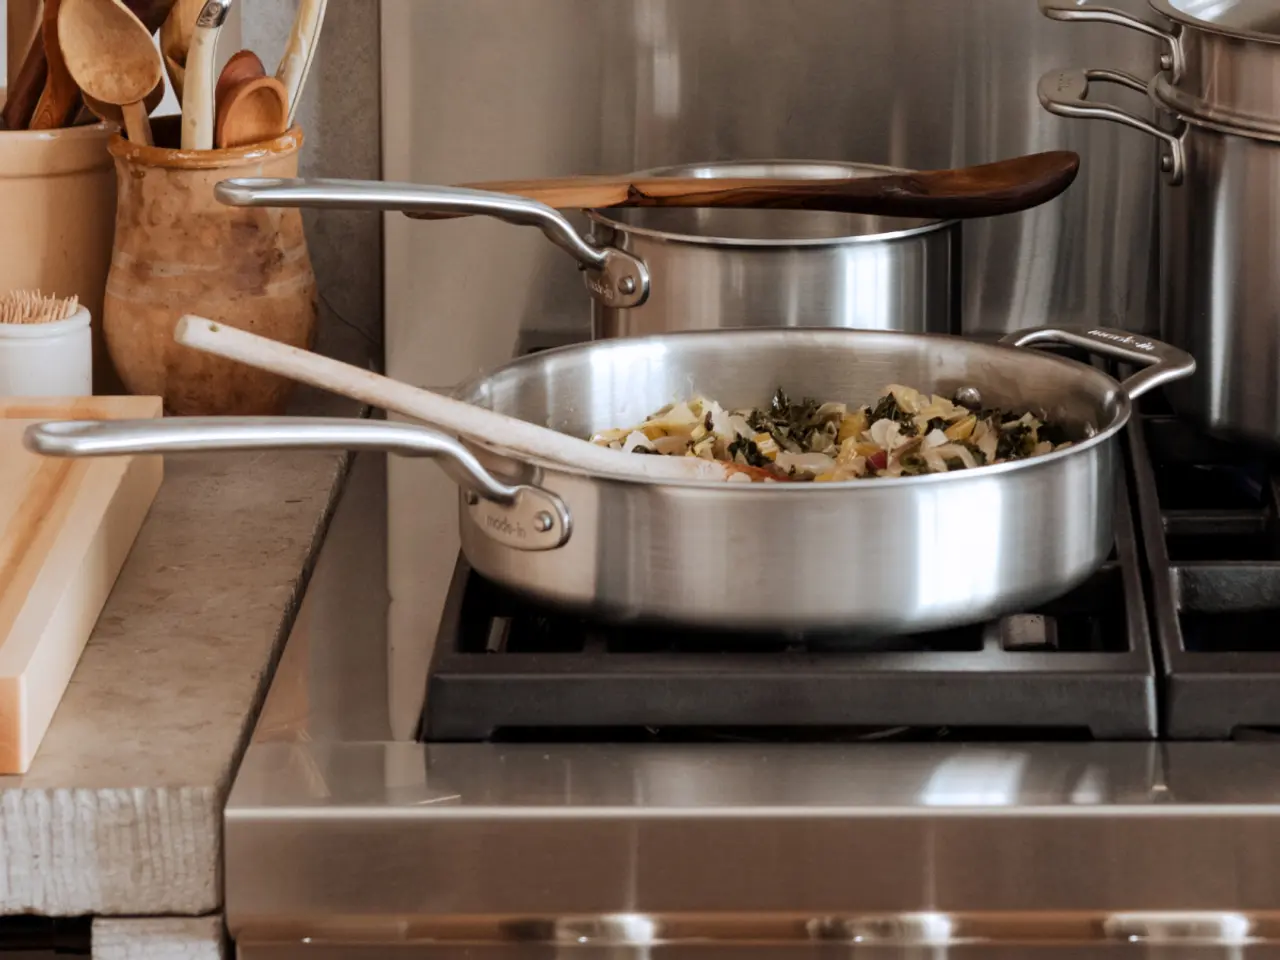 A stainless steel sauté pan with wooden-handled utensils, containing food, sits on a stove next to other kitchen pots and wooden cooking tools.